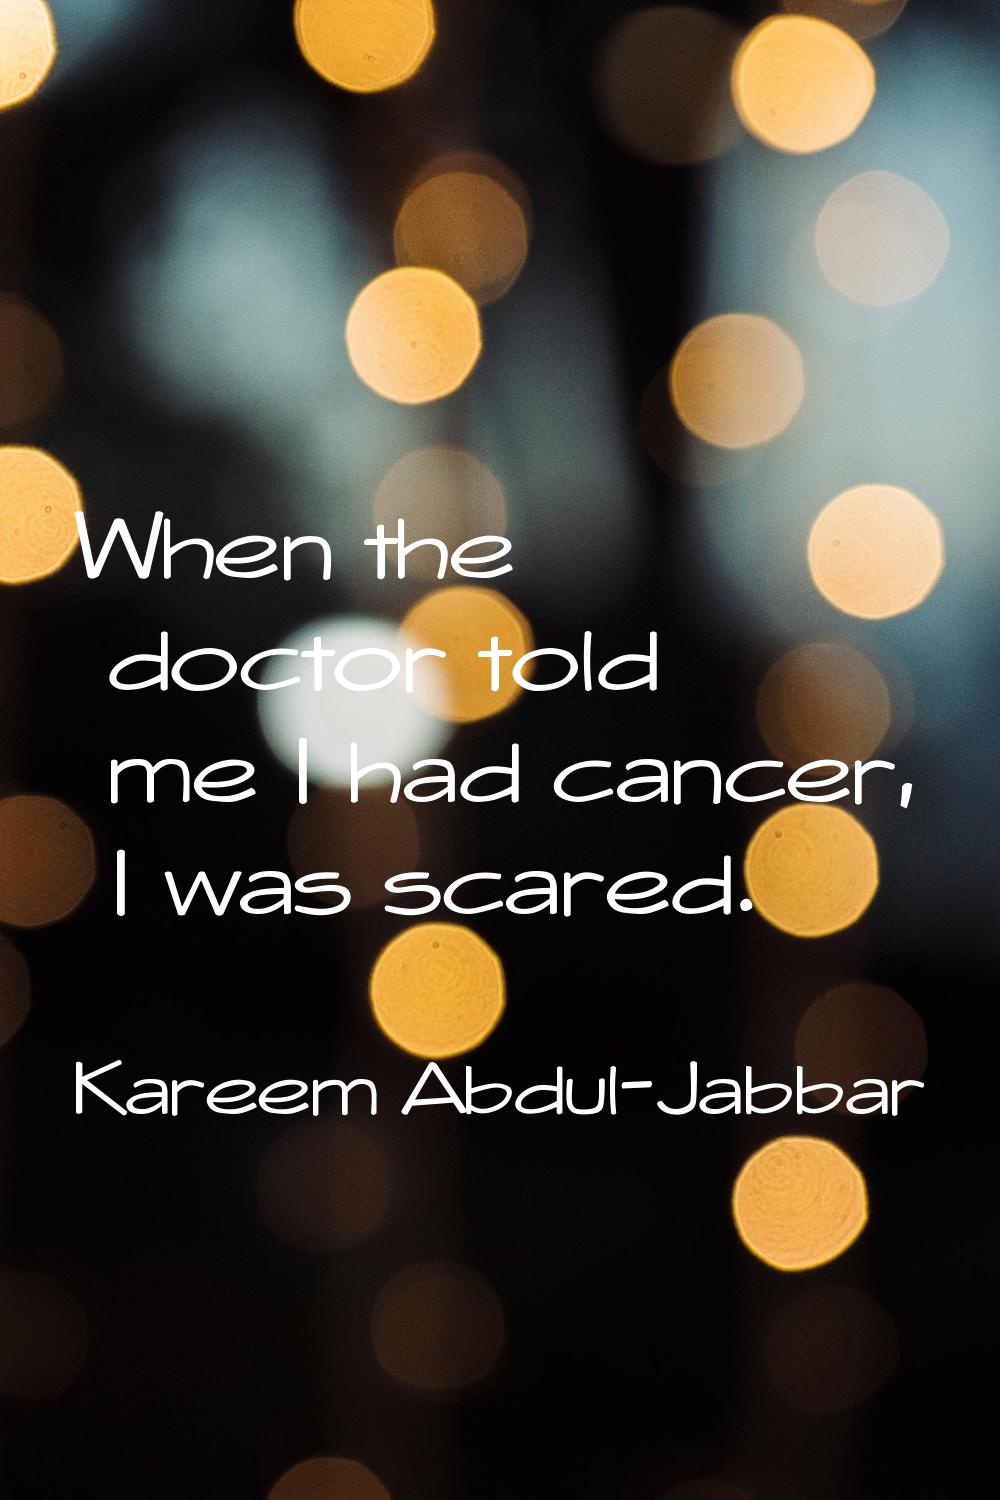 When the doctor told me I had cancer, I was scared.